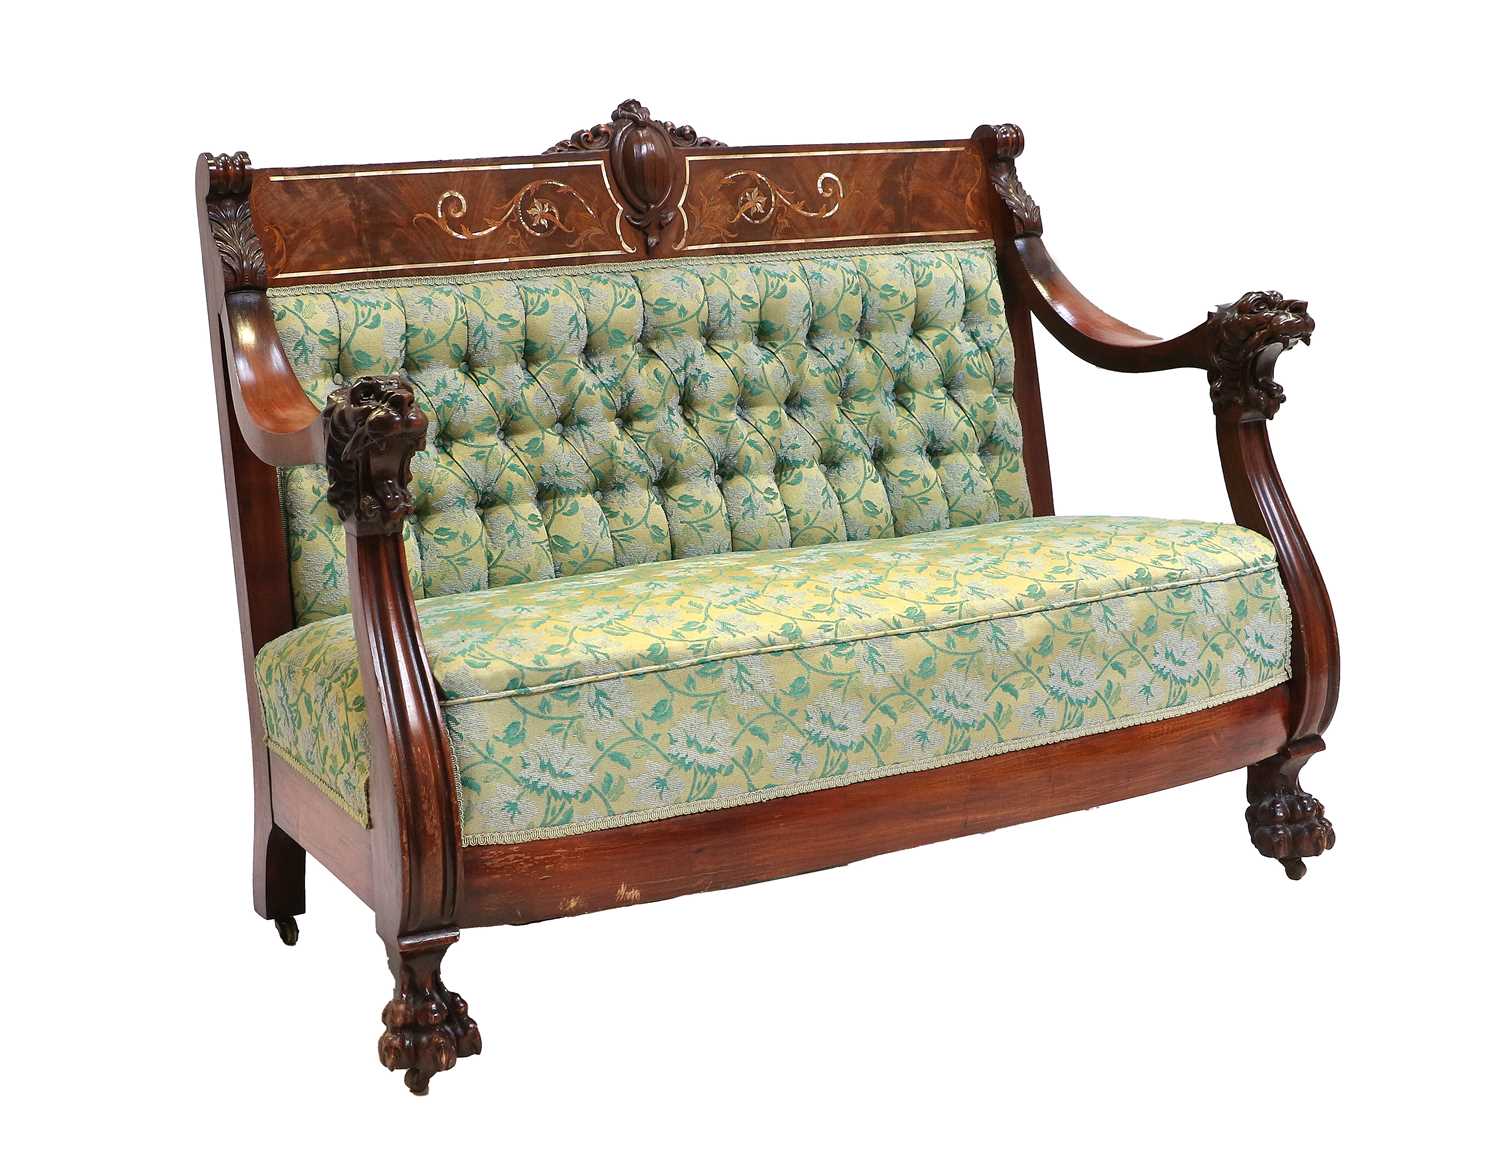 A Late 19th Century American Carved Mahogany, Marquetry and Mother-of-Pearl-Inlaid Two-Seater